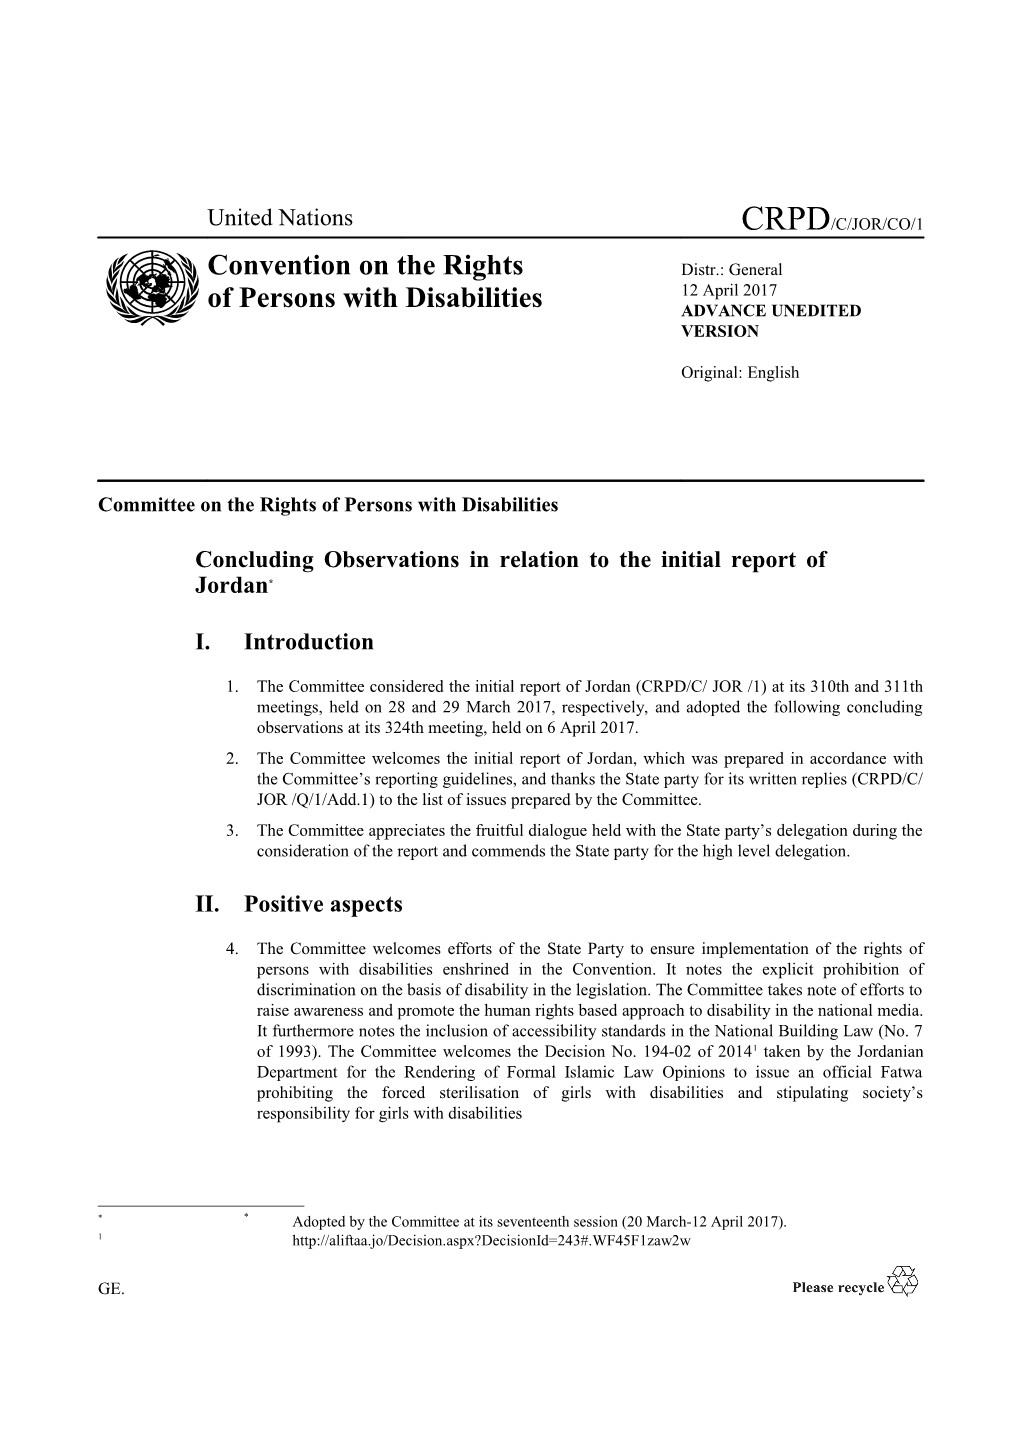 Committee on the Rights of Persons with Disabilities s17